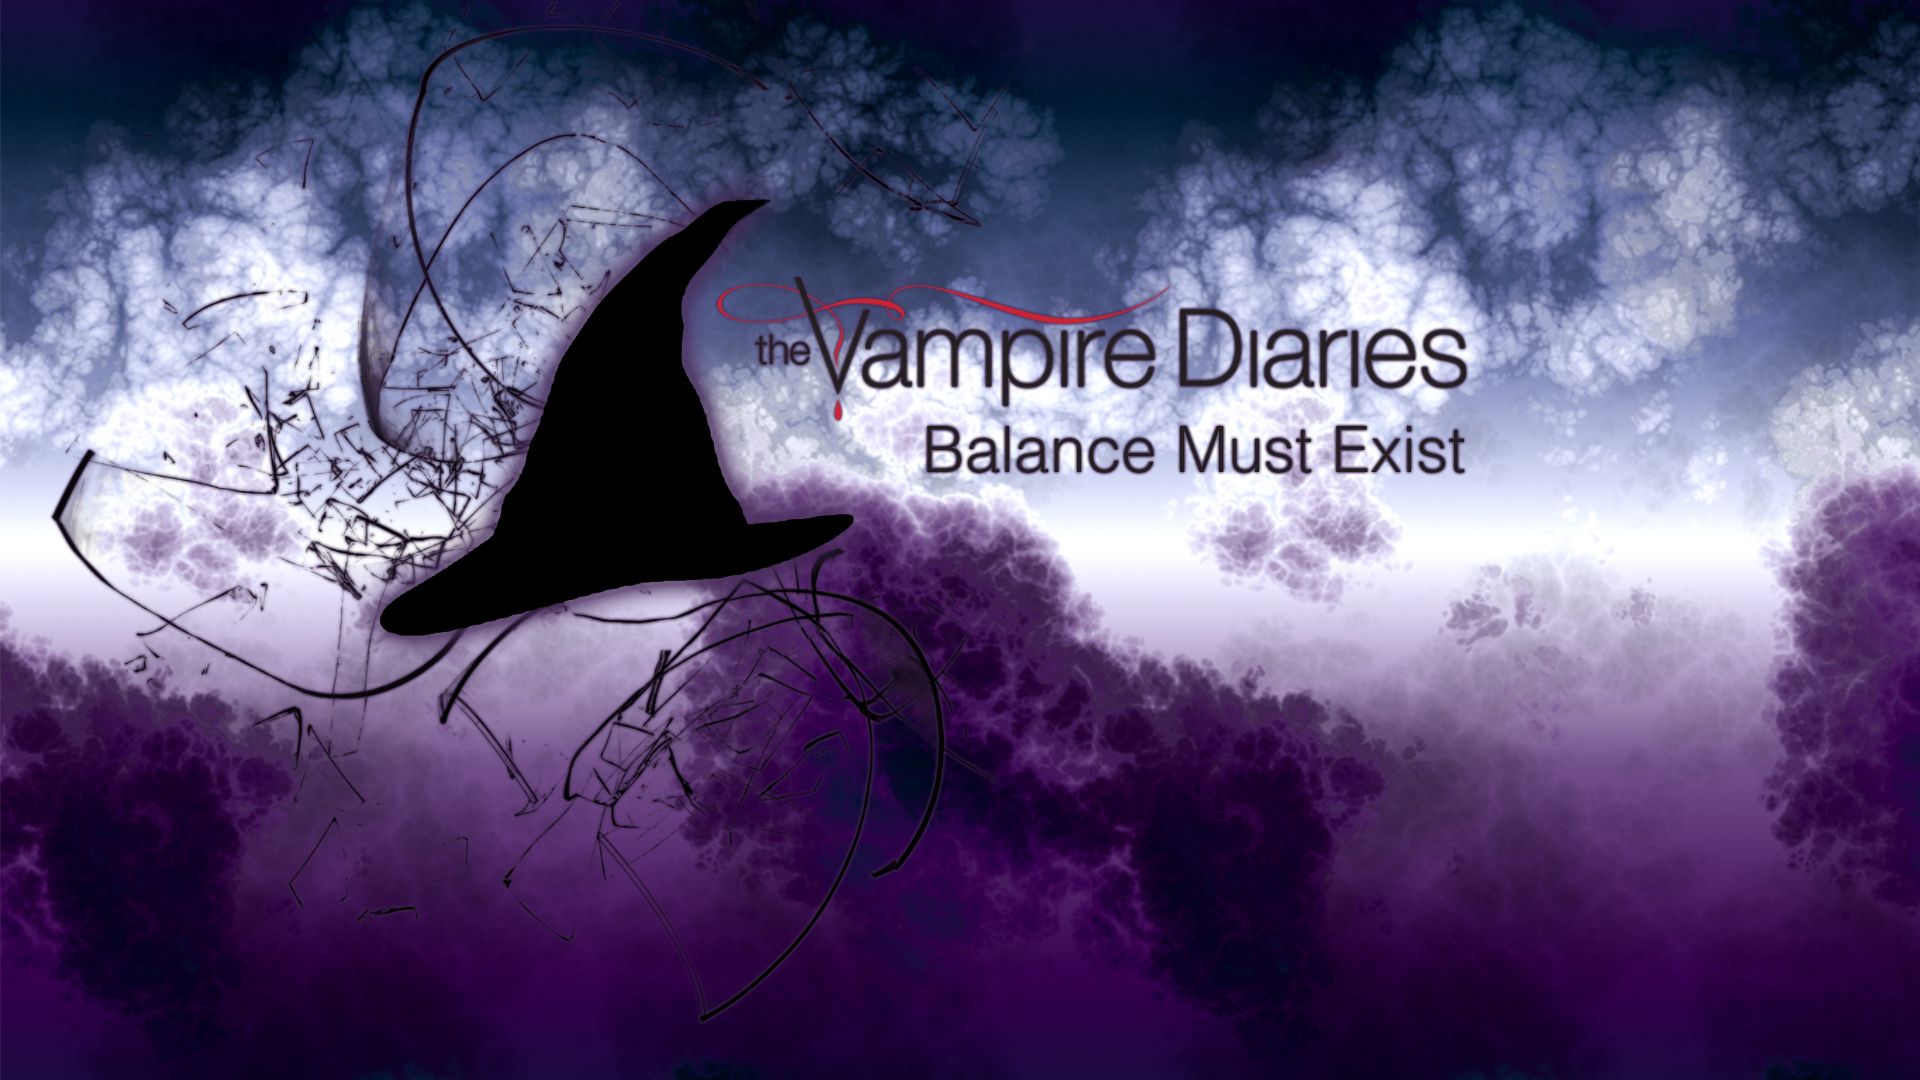 Free download The Vampire Diaries Wallpaper Series The Vampire Diaries [1920x1080] for your Desktop, Mobile & Tablet. Explore Vampire Diaries Background. The Vampire Diaries Wallpaper, Vampire Diaries All Seasons